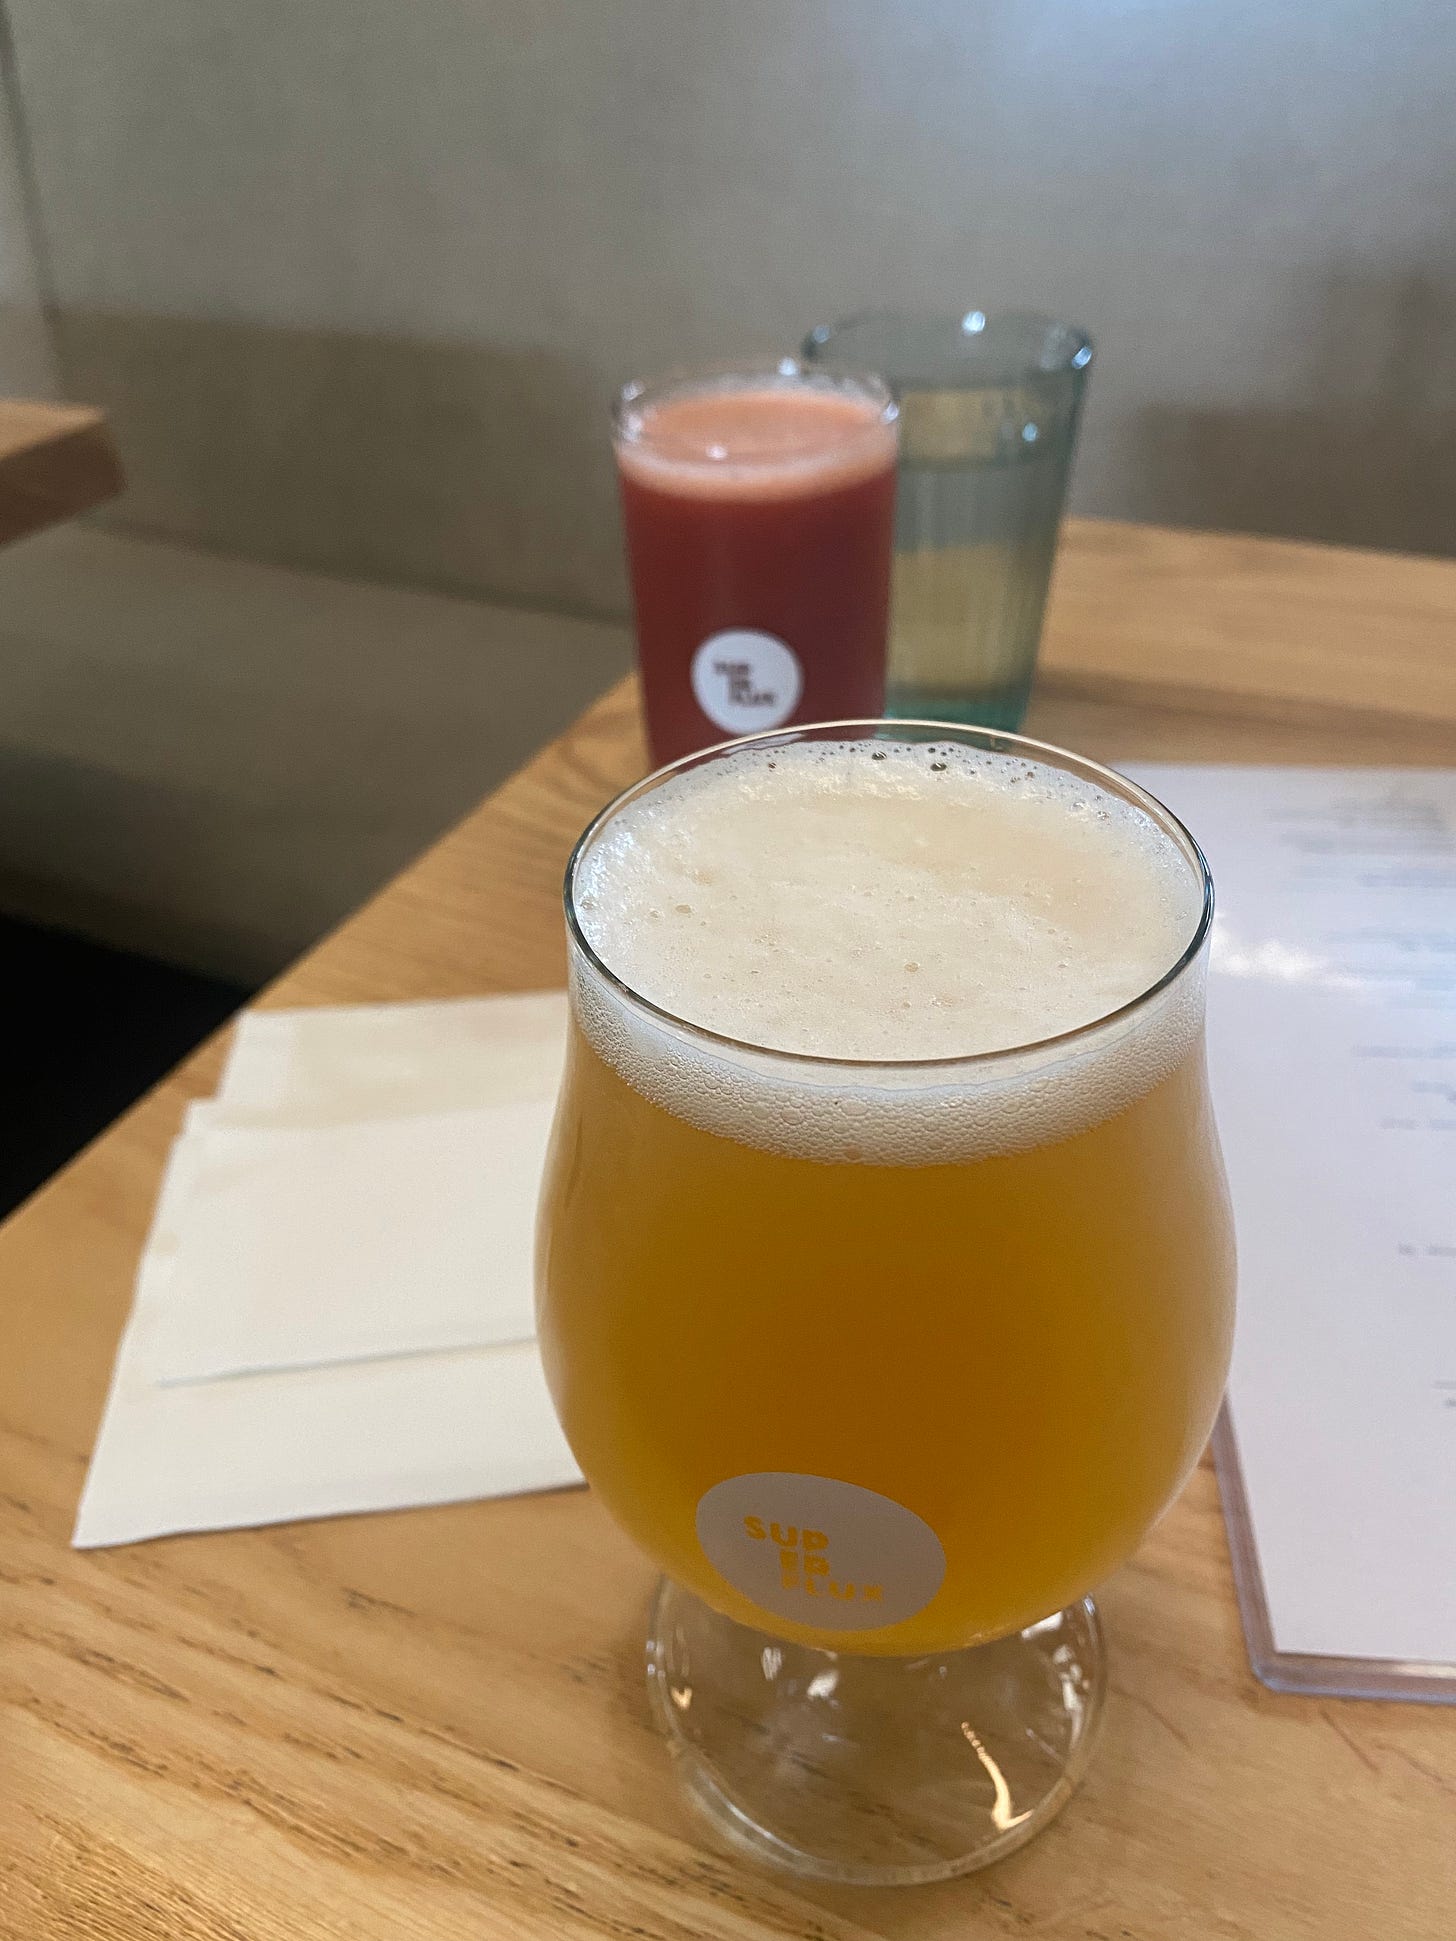 Two beers in Superflux-branded glasses, on a wooden table across from each other. The near one is an IPA in a bell-shaped glass, and the rear one is a deep red smoothie sour in a half-pint glass. A menu in a plastic sleeve is visible on the right-hand side of the table.